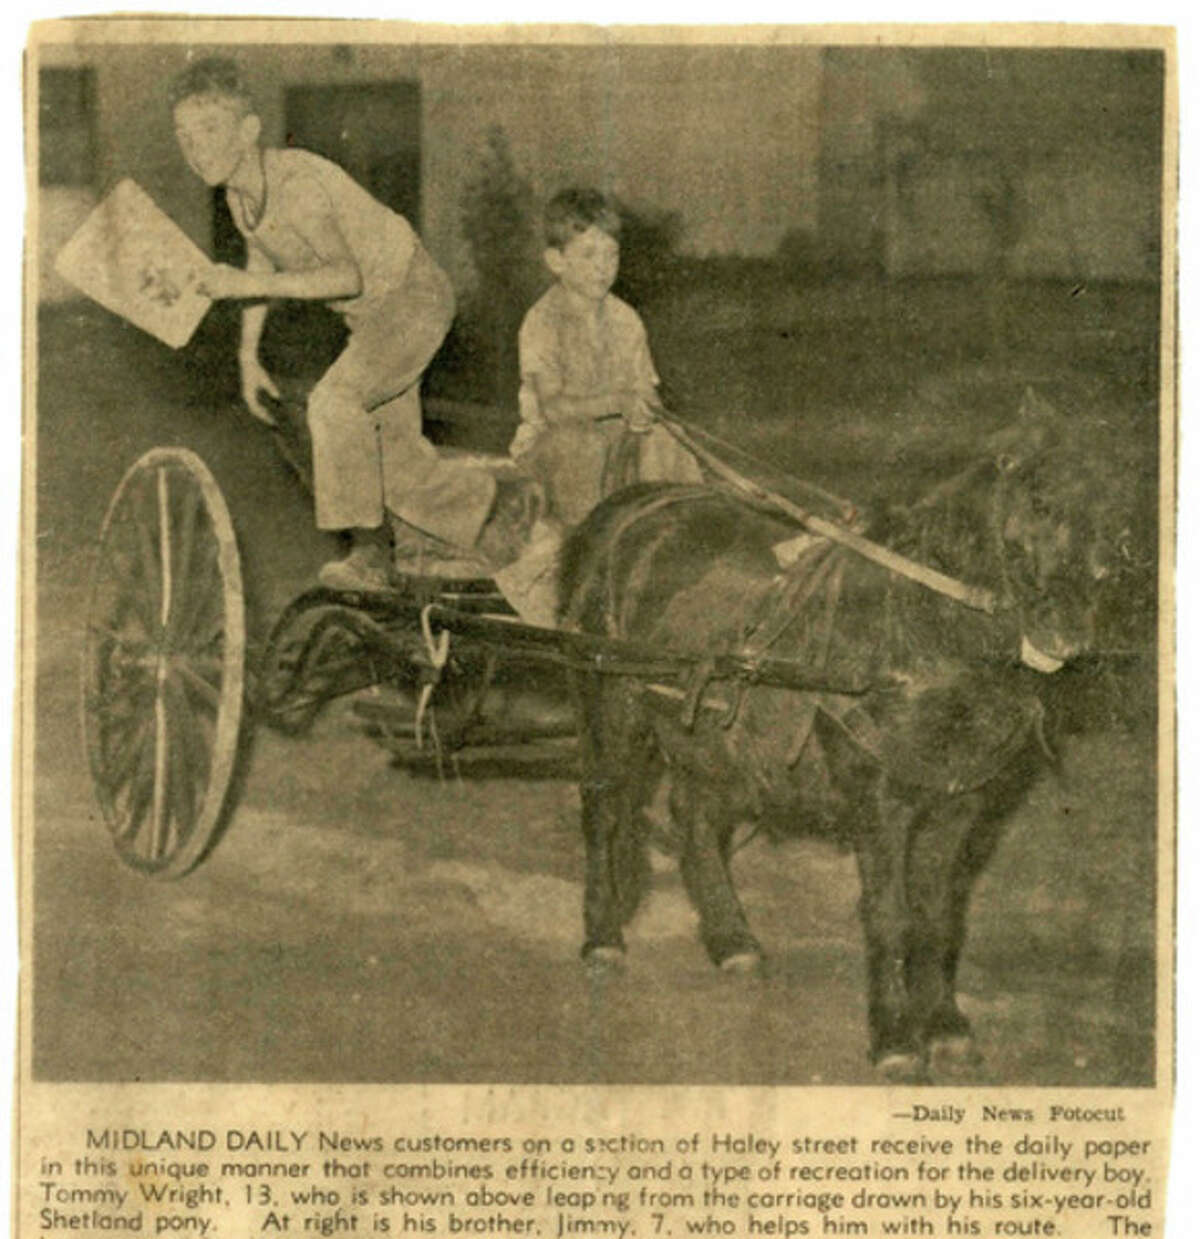 Daily News photo/Copy courtesy of Tom Wright 70 years ago: Midland Daily News customers on a section of Haley Street receive the daily paper in this unique manner that combines the efficiency and a type of recreation for the delivery boy. Tommy Wright, 13, is shown leaping from carriage drawn by his 6-year-old Shetland pony. At right is his brother, Jimmy, 7, who helps with the route.